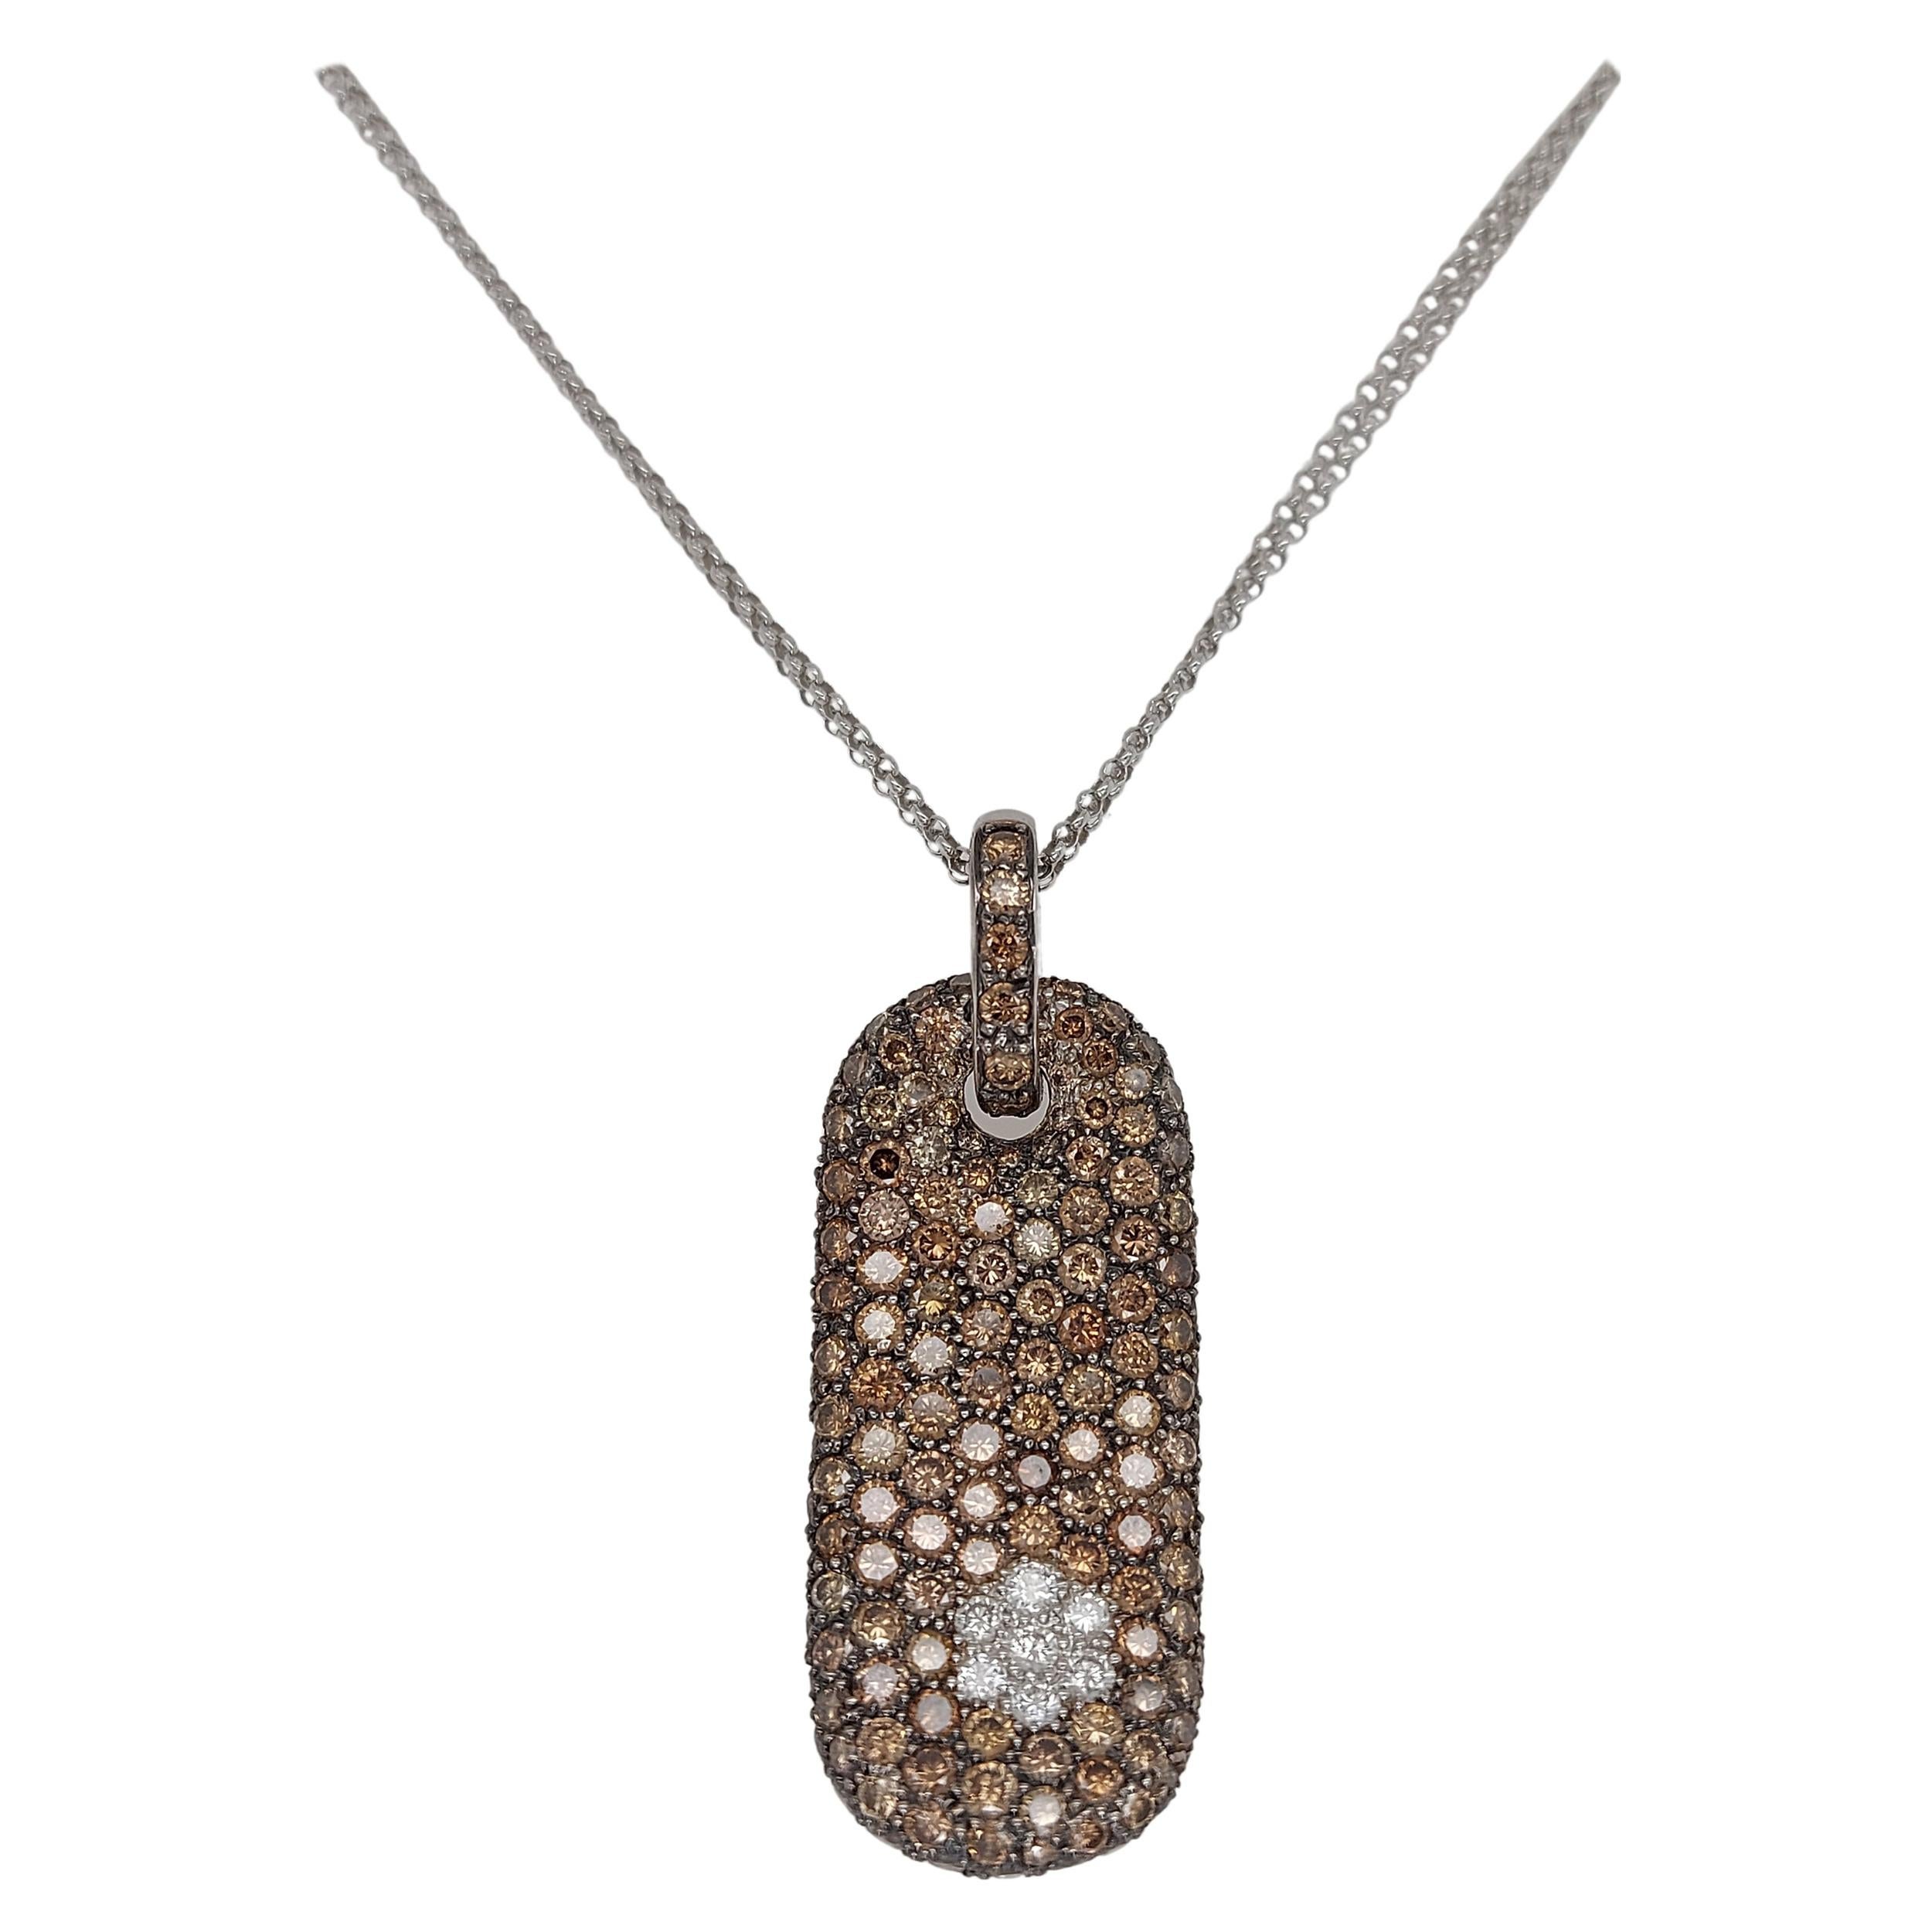 18kt White Gold Pendant, Necklace with 0.28ct White & 6ct Brown Diamonds